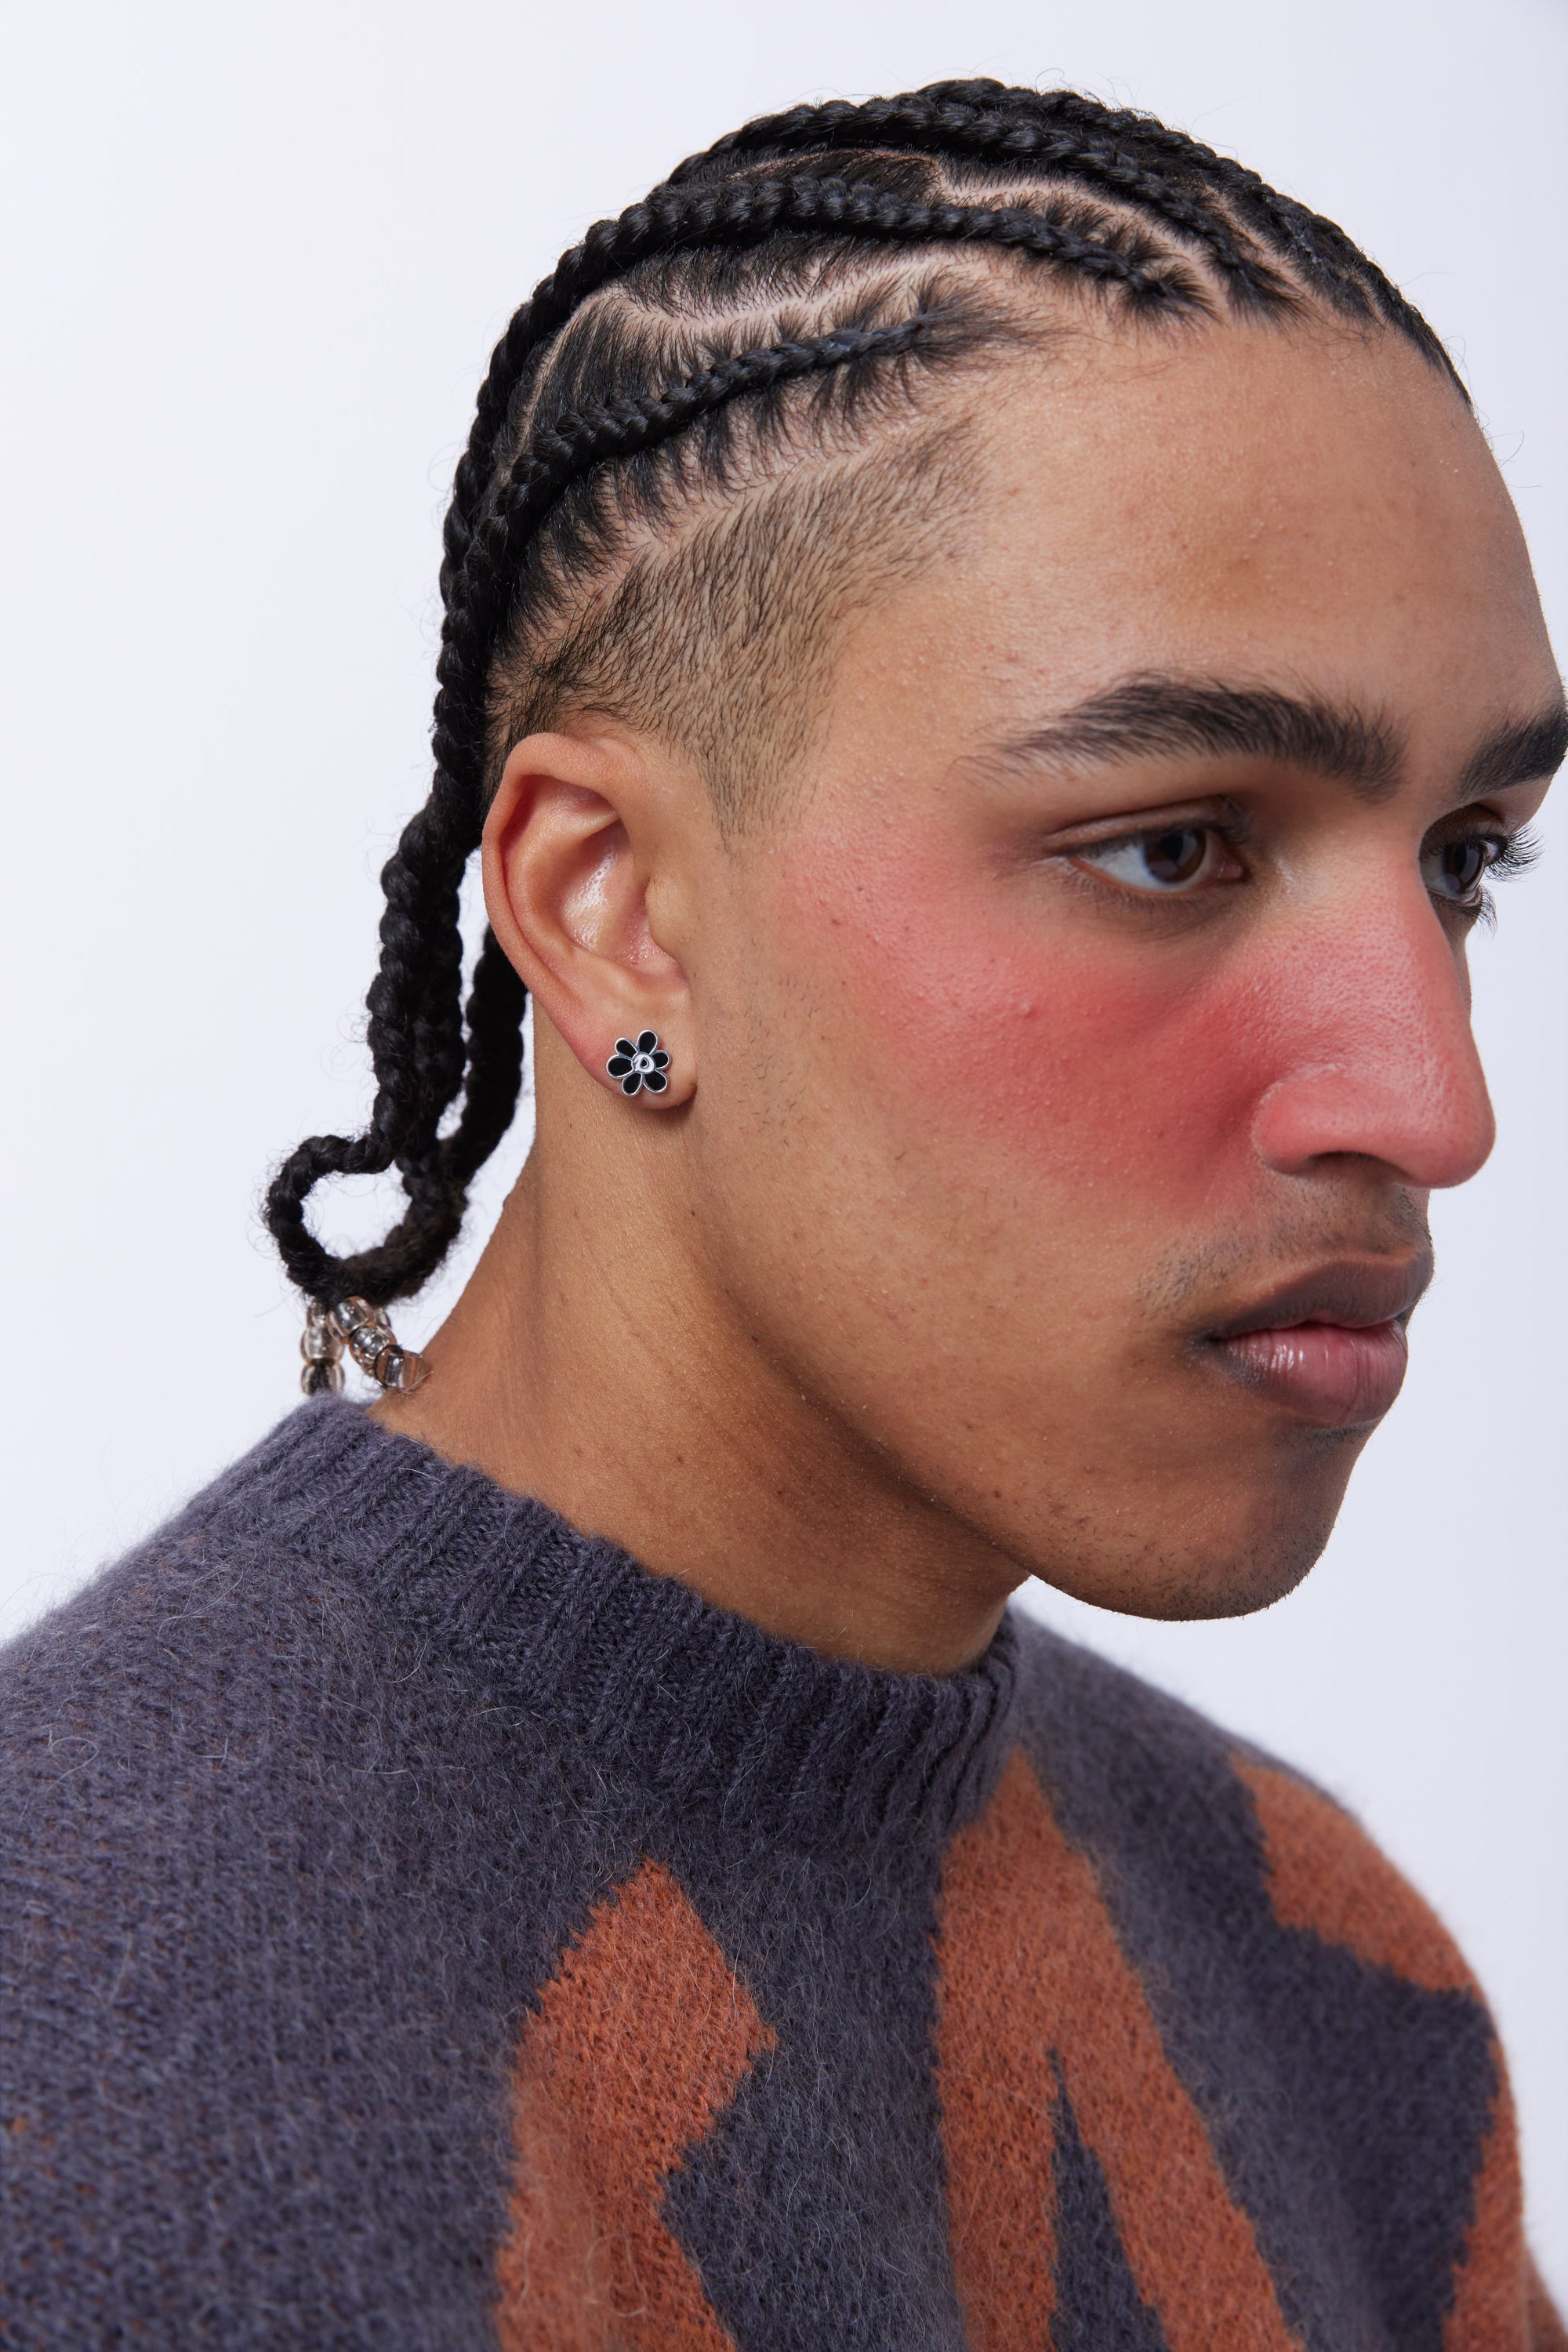 The P. WORLD GESTURES STUD EARRING  available online with global shipping, and in PAM Stores Melbourne and Sydney.